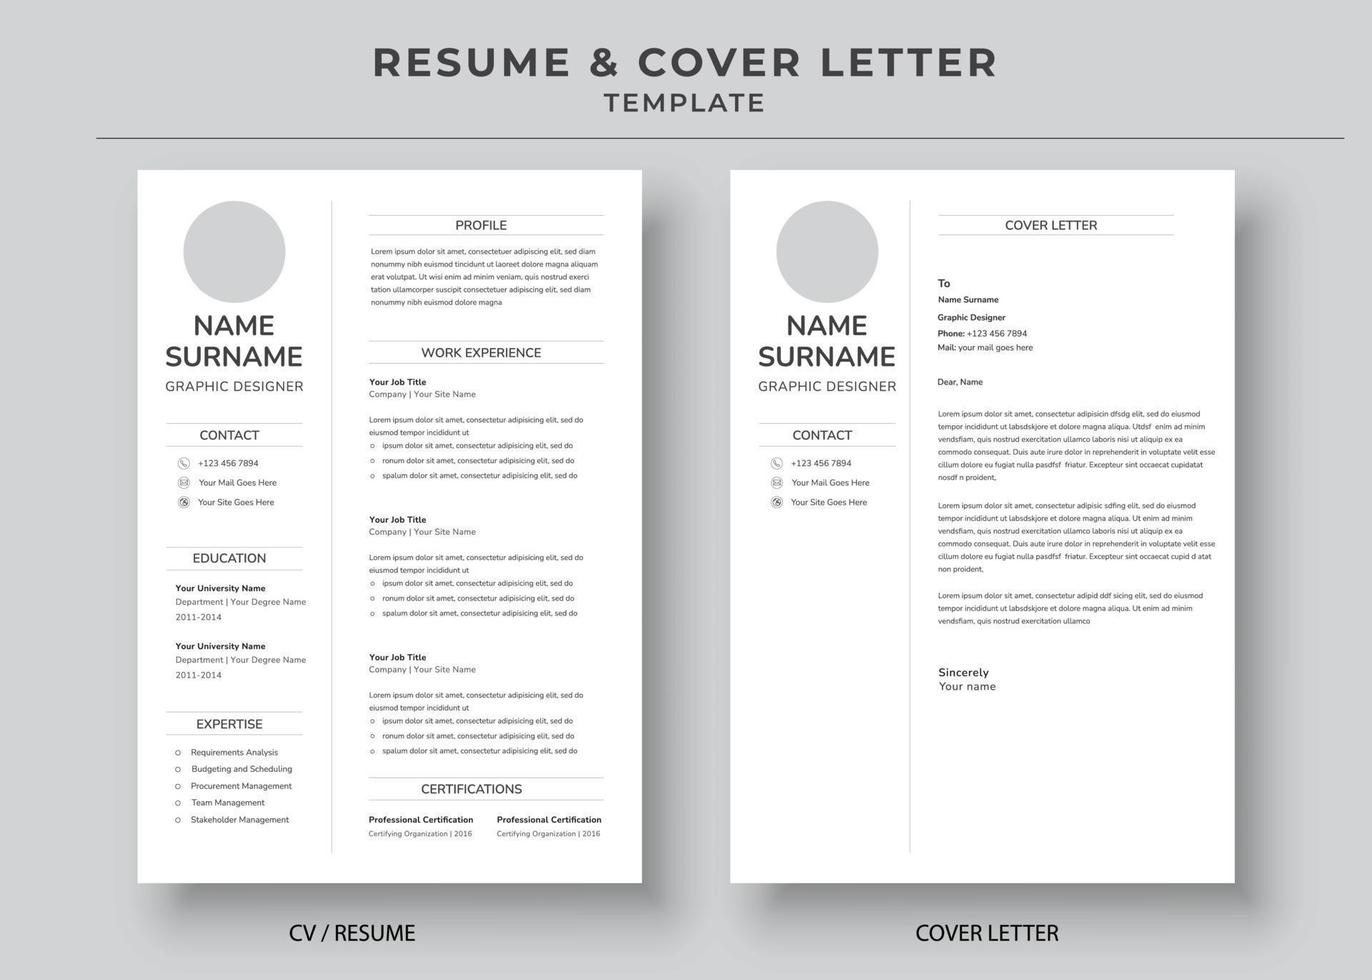 Resume and Cover Letter Template, Minimalist resume cv template, Cv professional jobs resumes vector